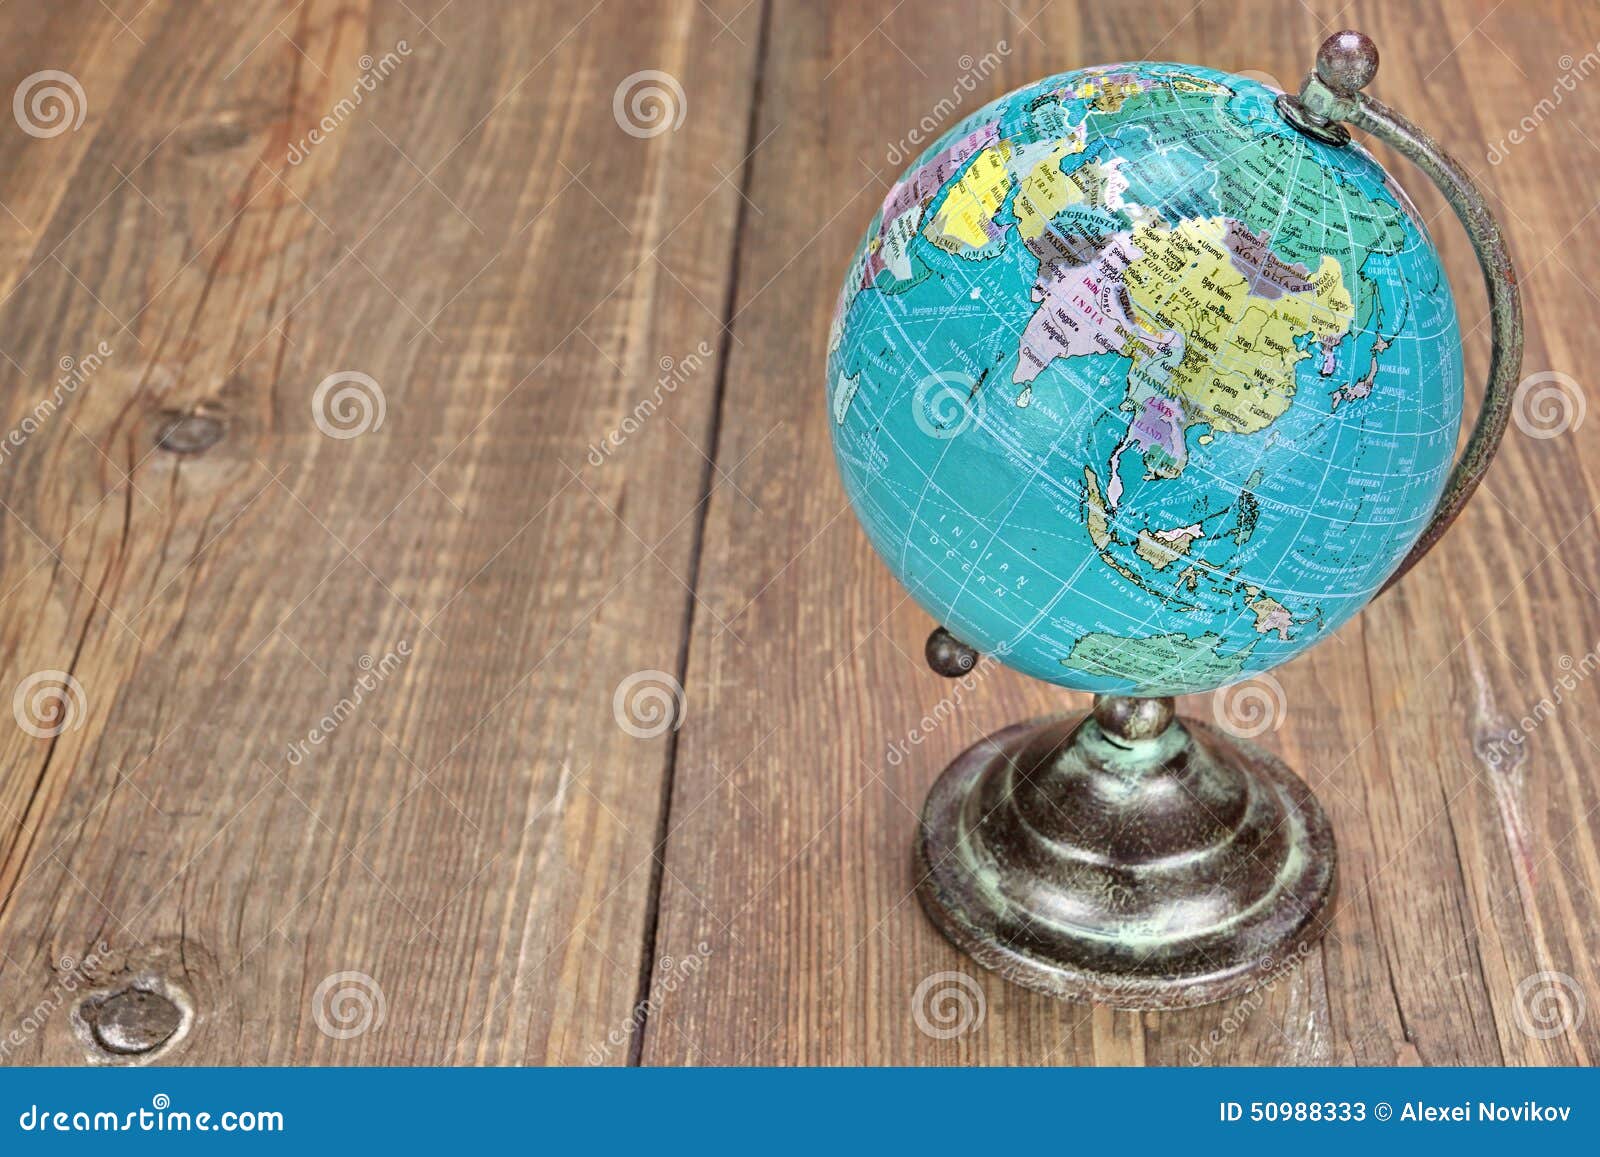 world geographical globe on the wooden table